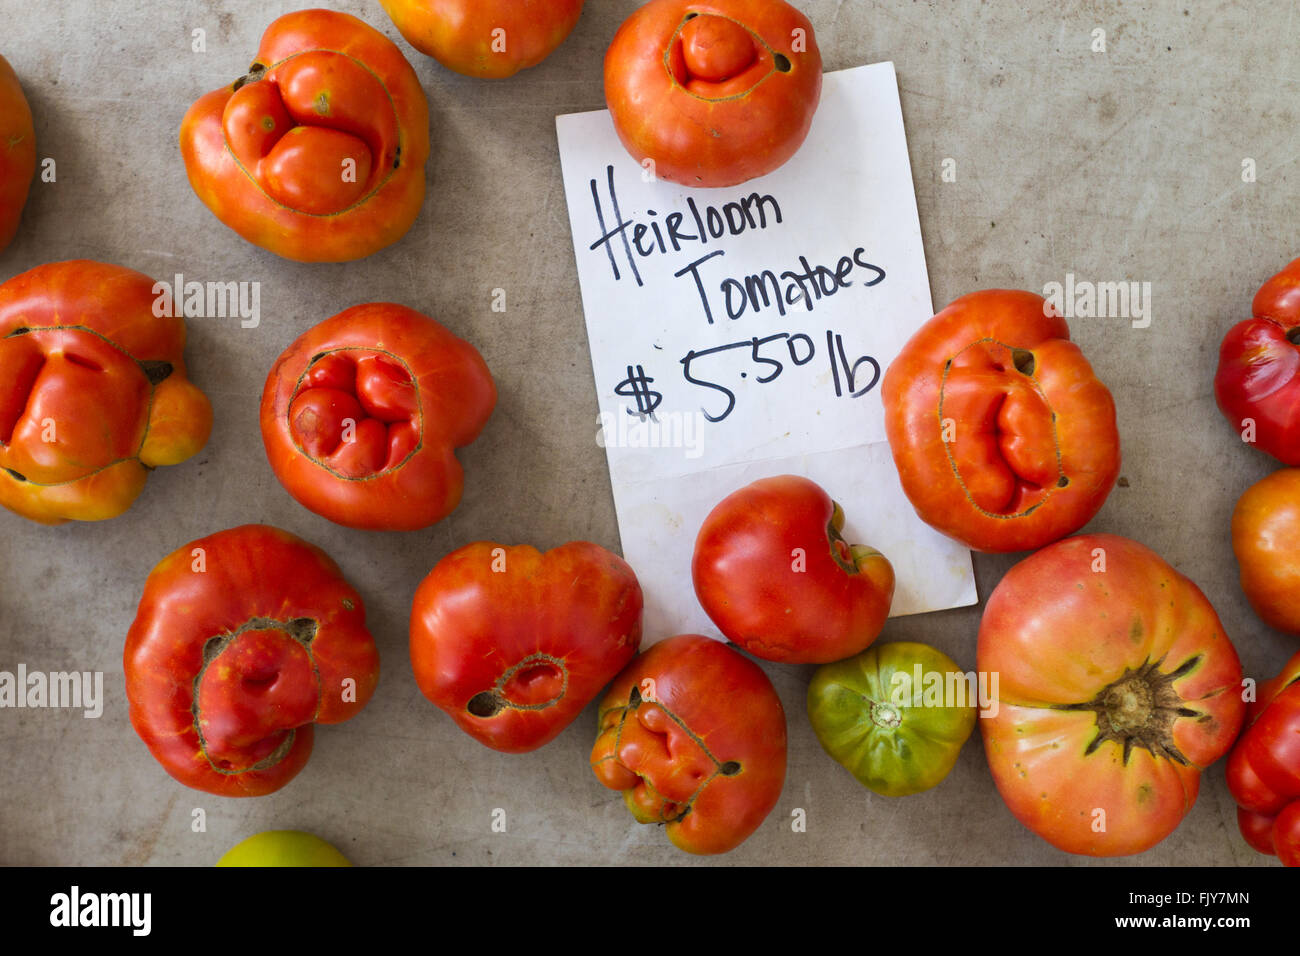 Rustic heirloom tomatoes at the market Stock Photo